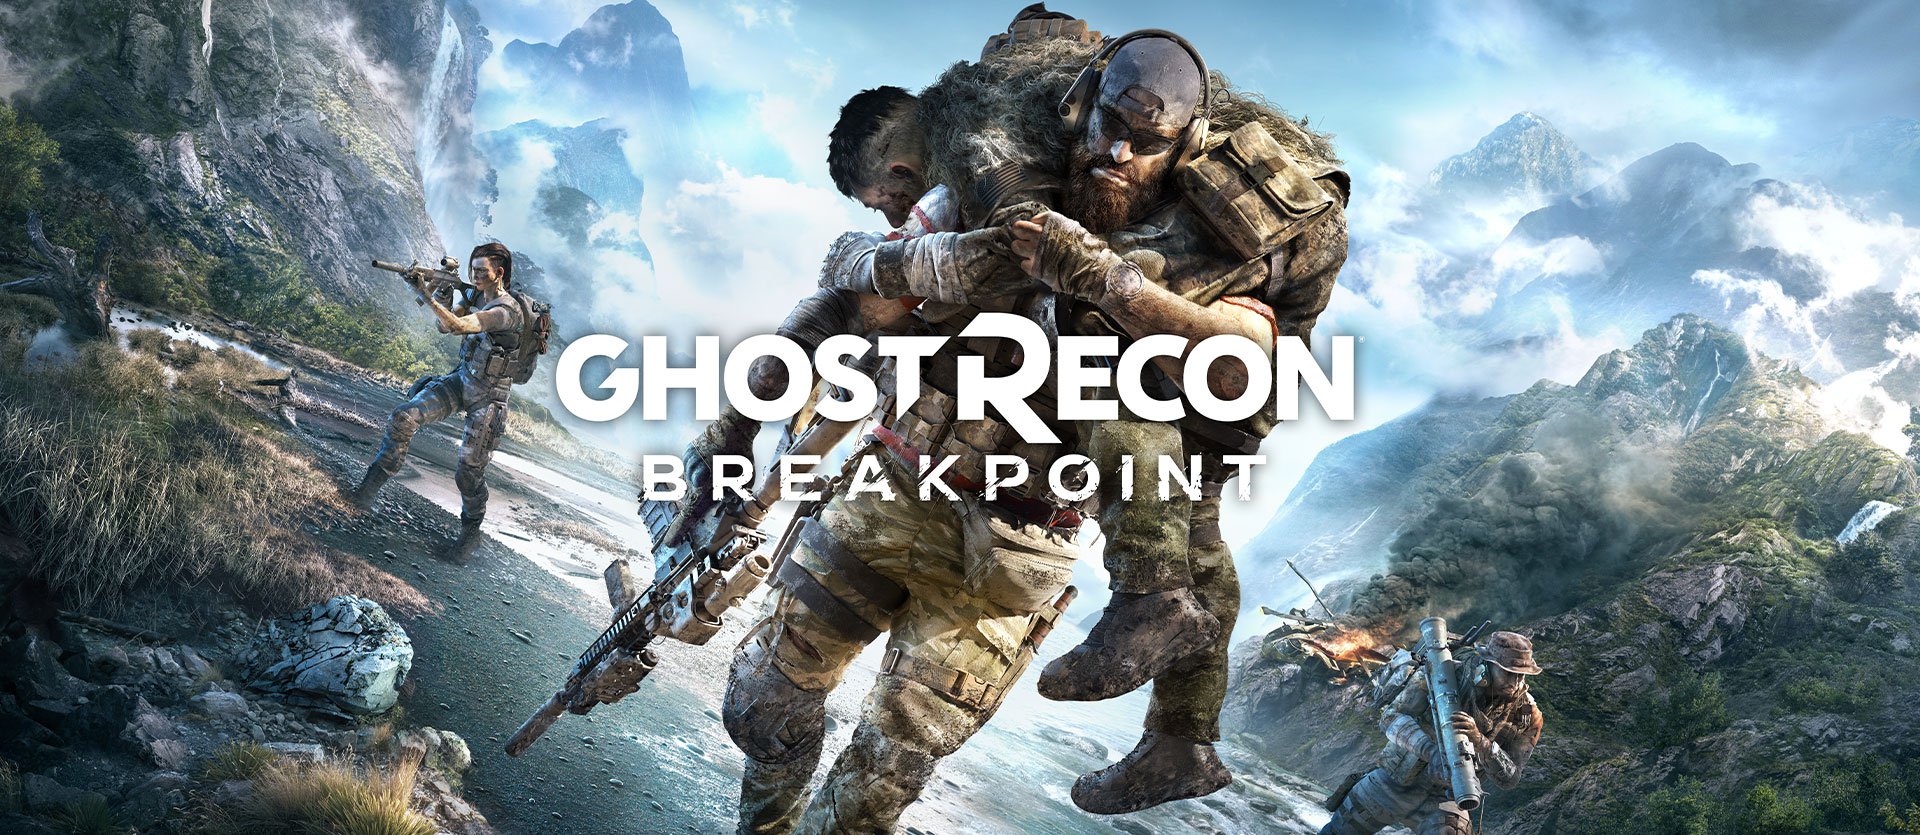 ESD Tom Clancys Ghost Recon Breakpoint 